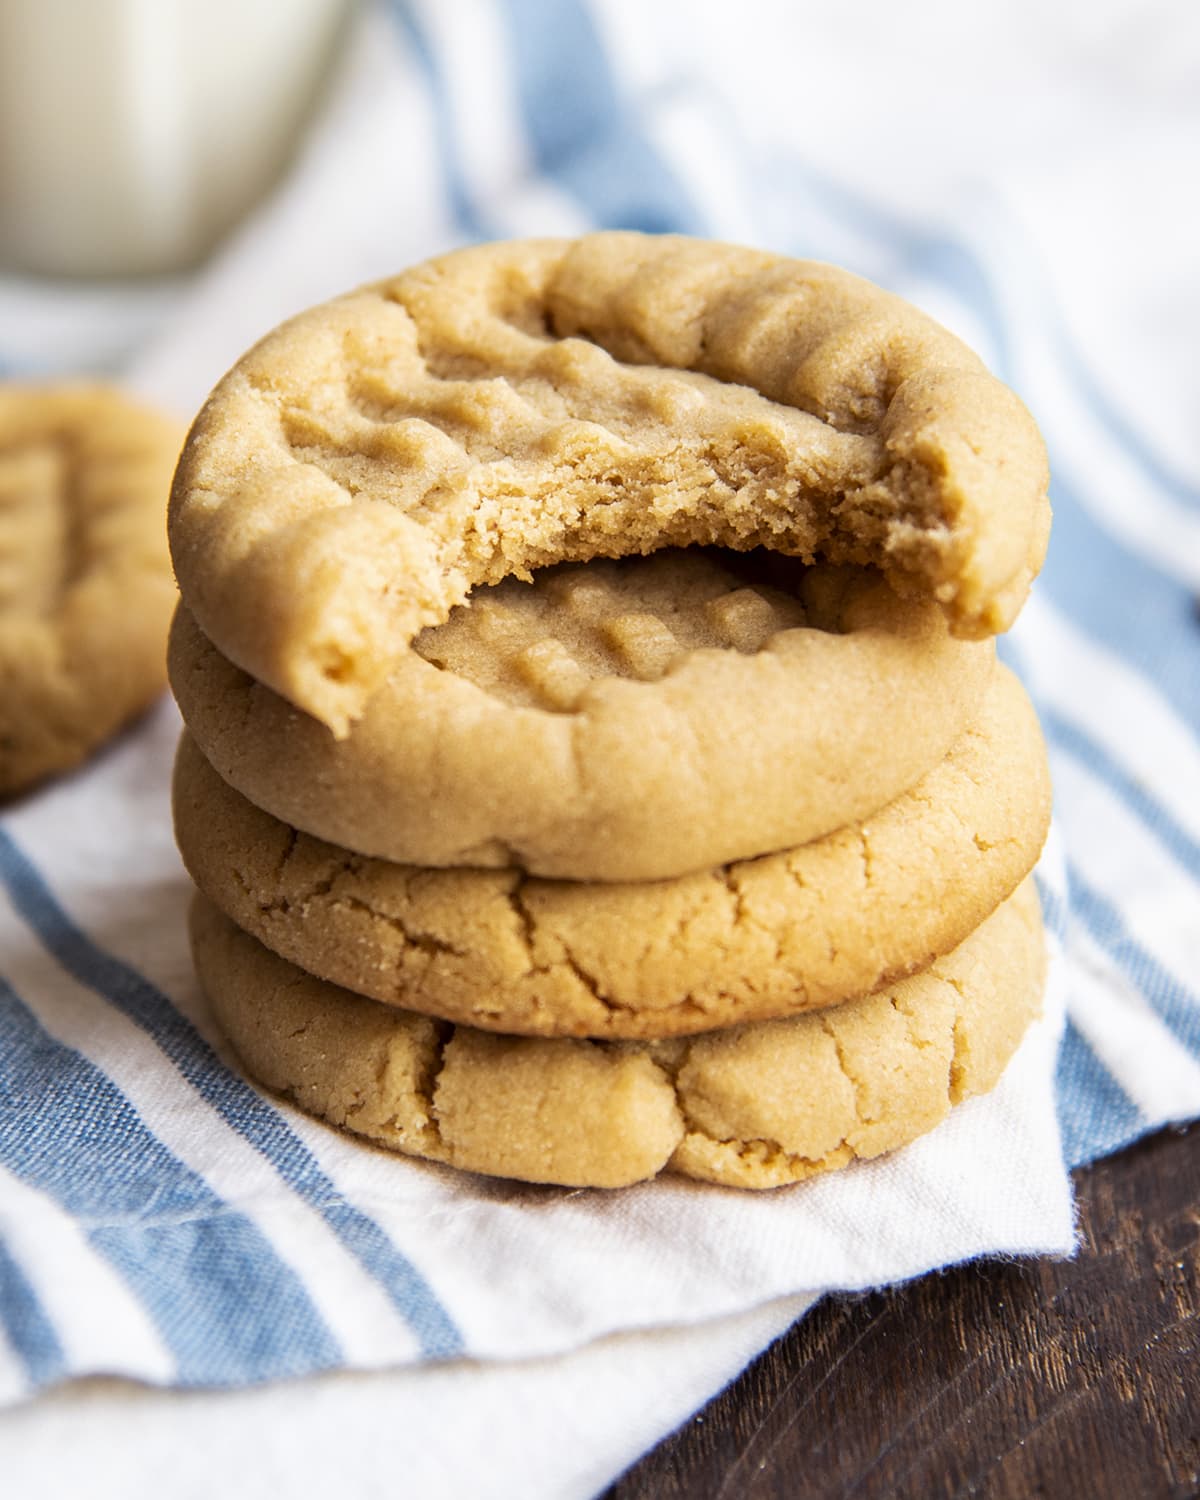 A stack of peanut butter cookies and the top cookie has a bite out of it.